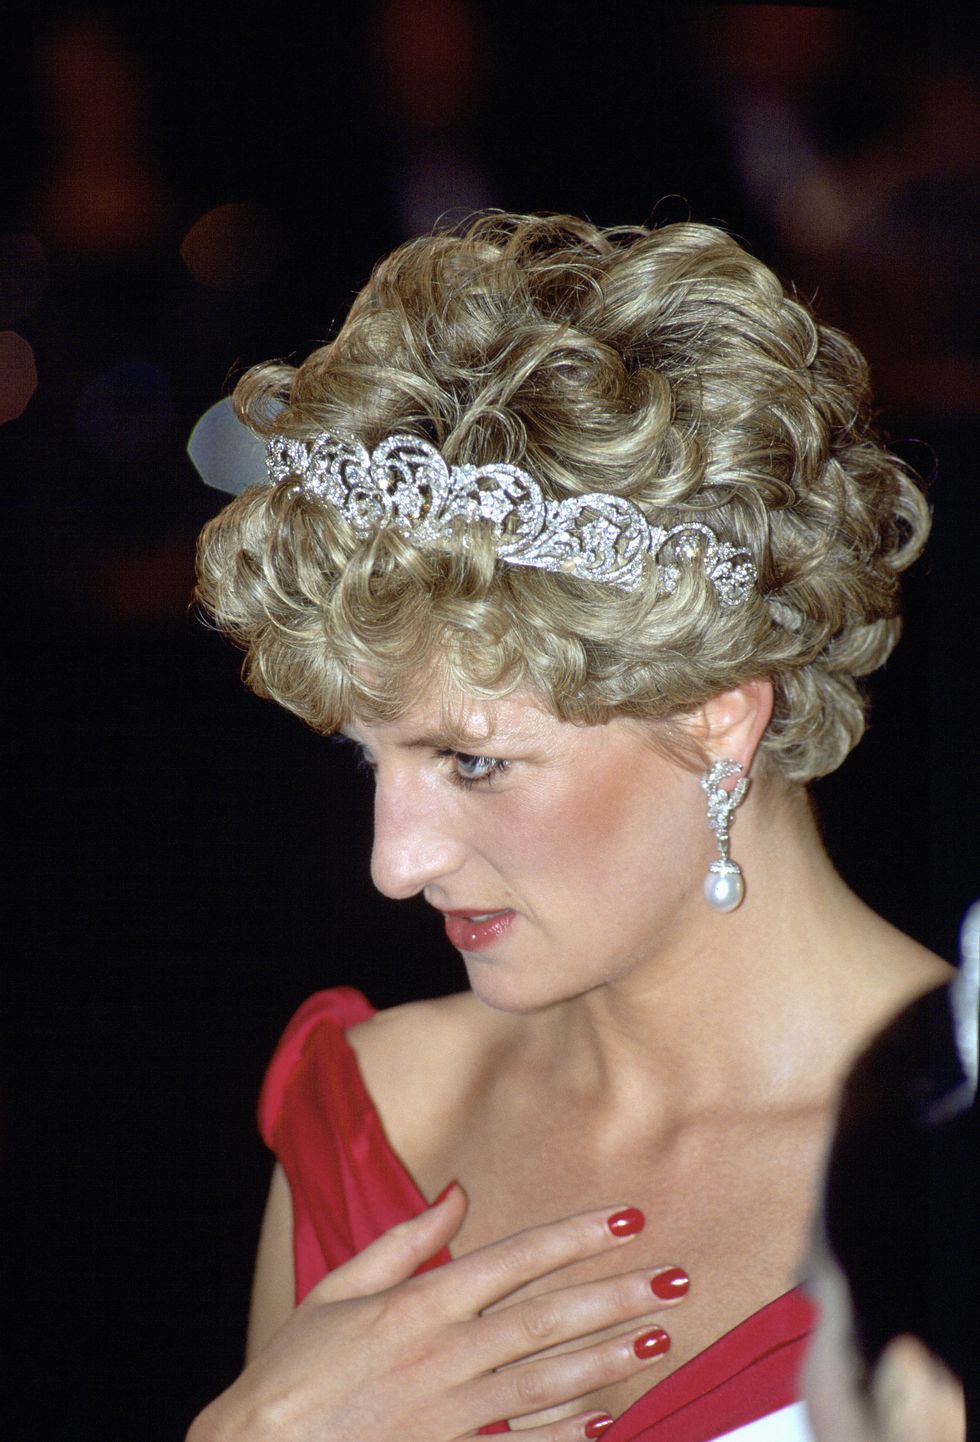 BUDAPEST, HUNGARY - MARCH 23:  Princess Diana Attending The English National Ballet Gala Performance In Budapest. She Is Wearing The Spencer Family Tiara And Has Dark Red Nail Varnish On Her Newly Grown Fingernails.  (Photo by Tim Graham/Getty Images)